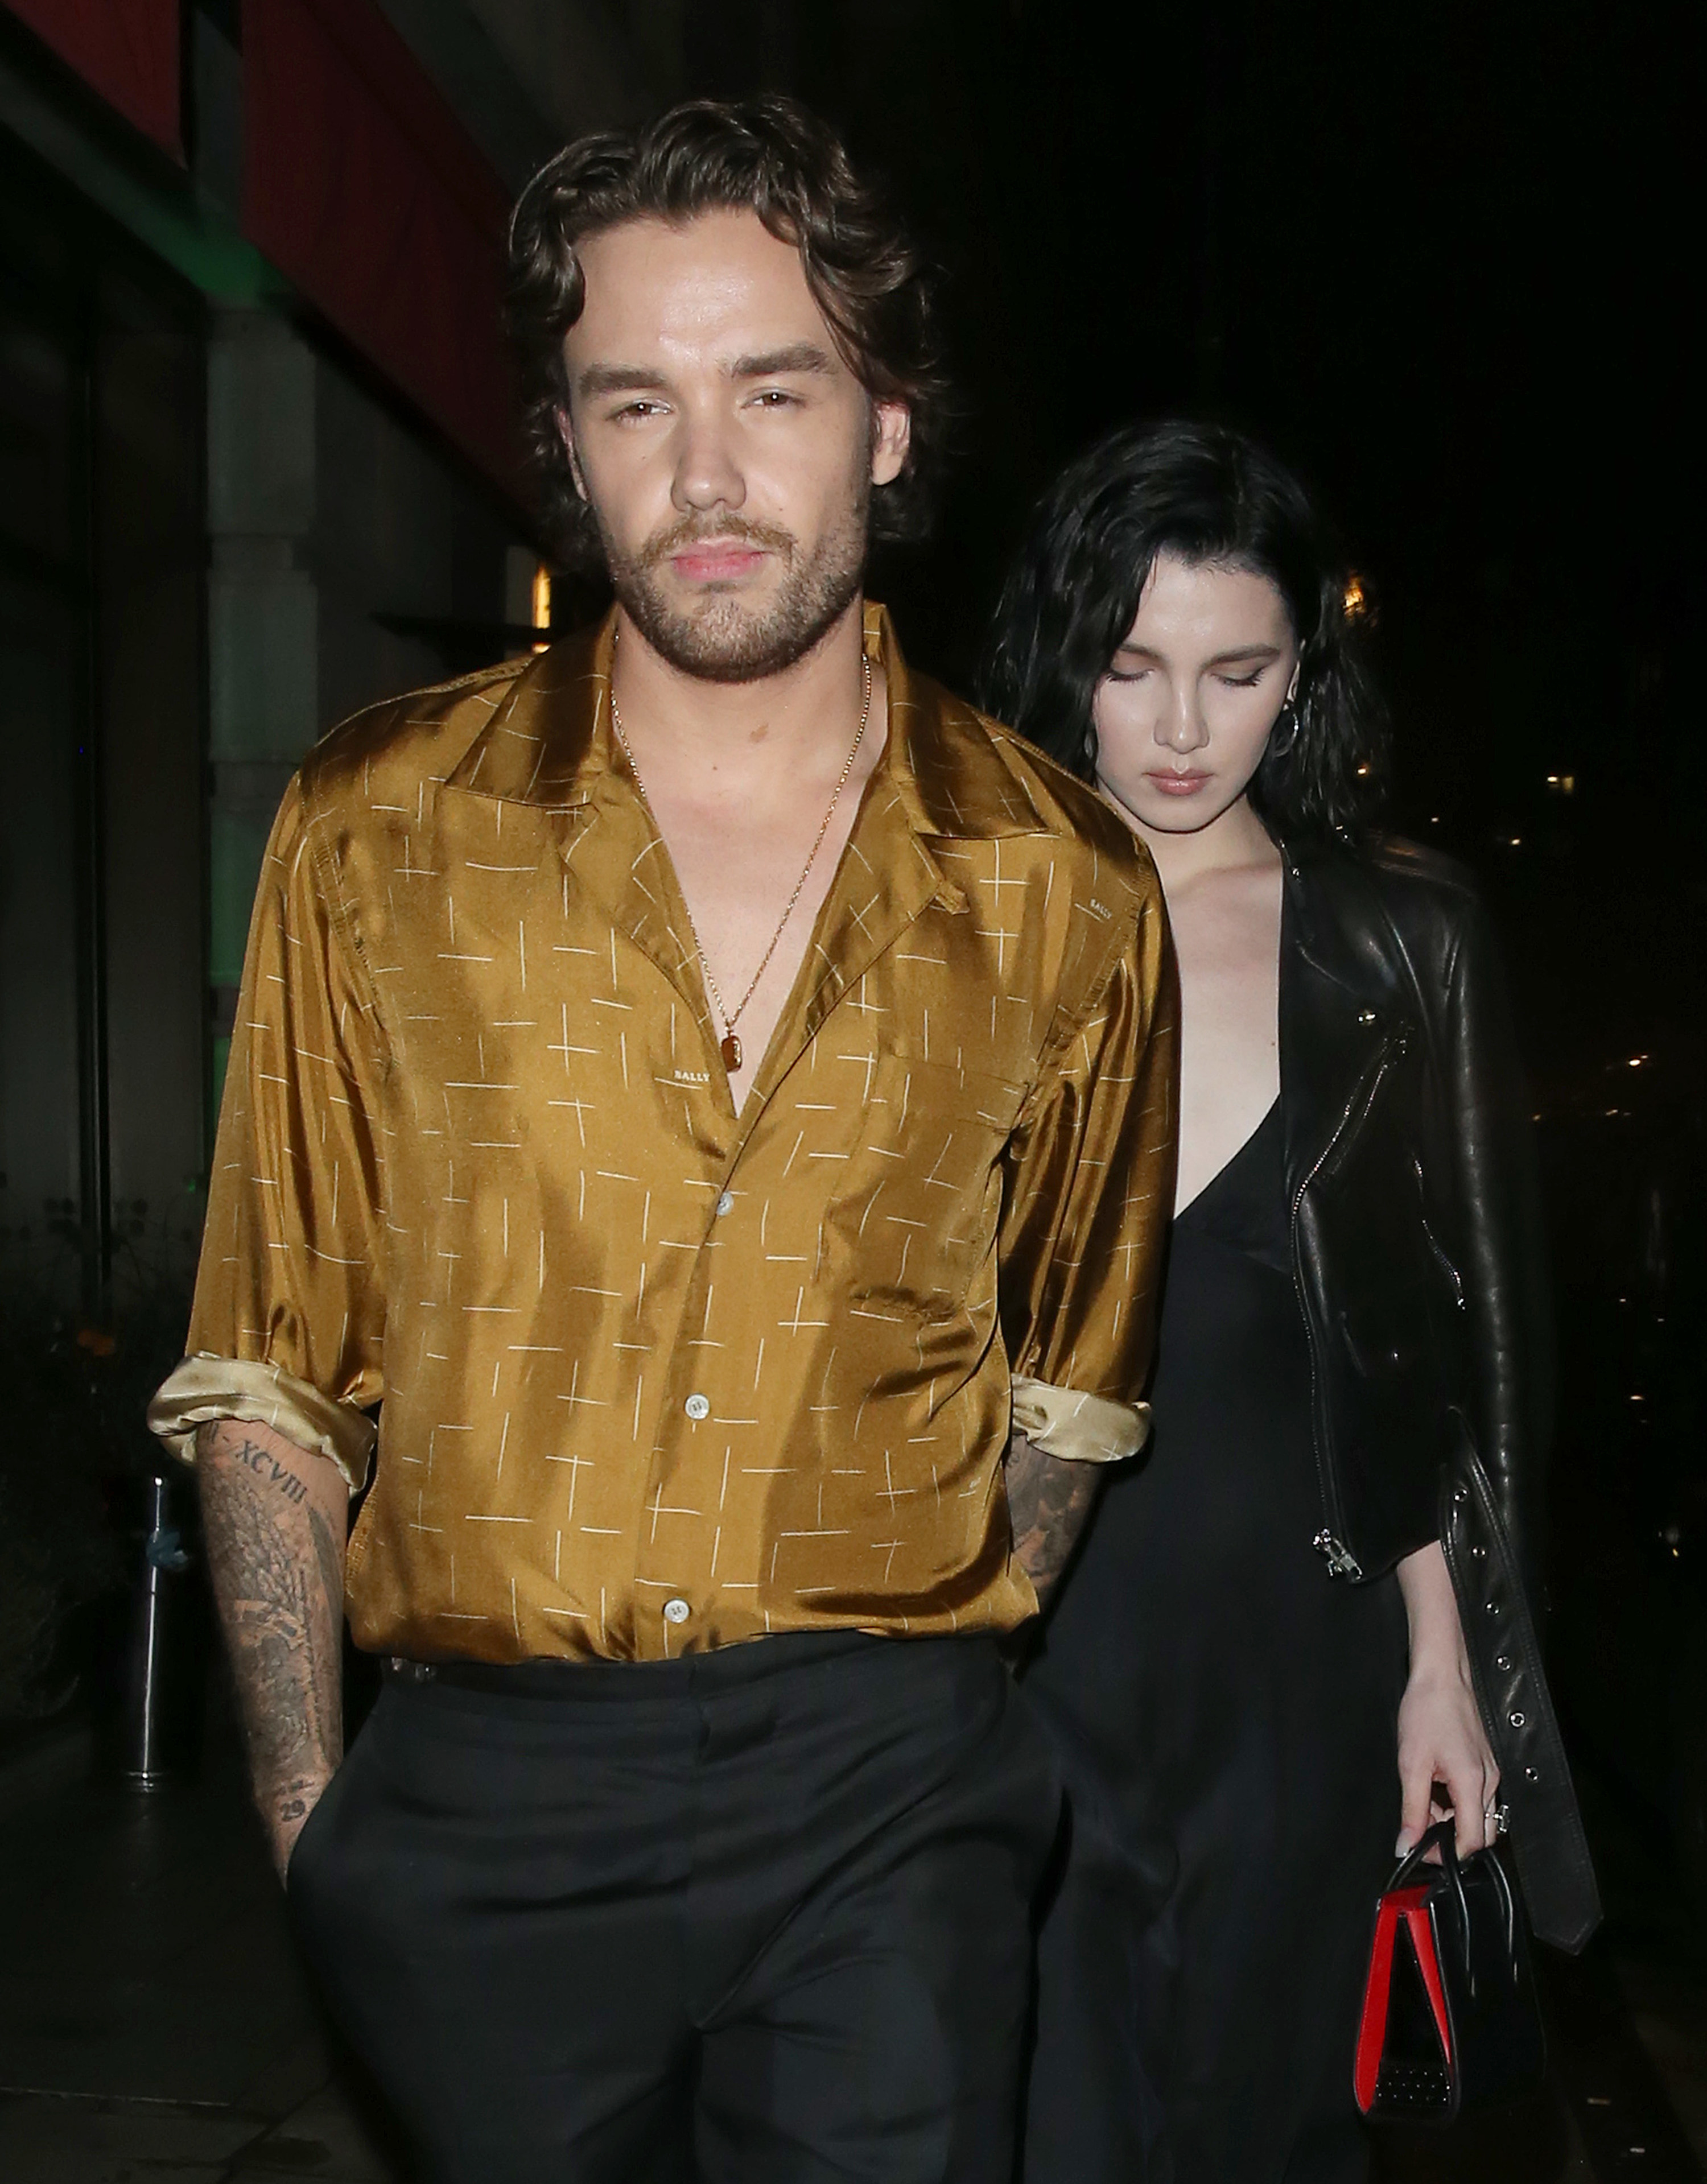 Liam Payne and Maya Henry are seen leaving Novikov restaurant on August 27, 2020 in London, England